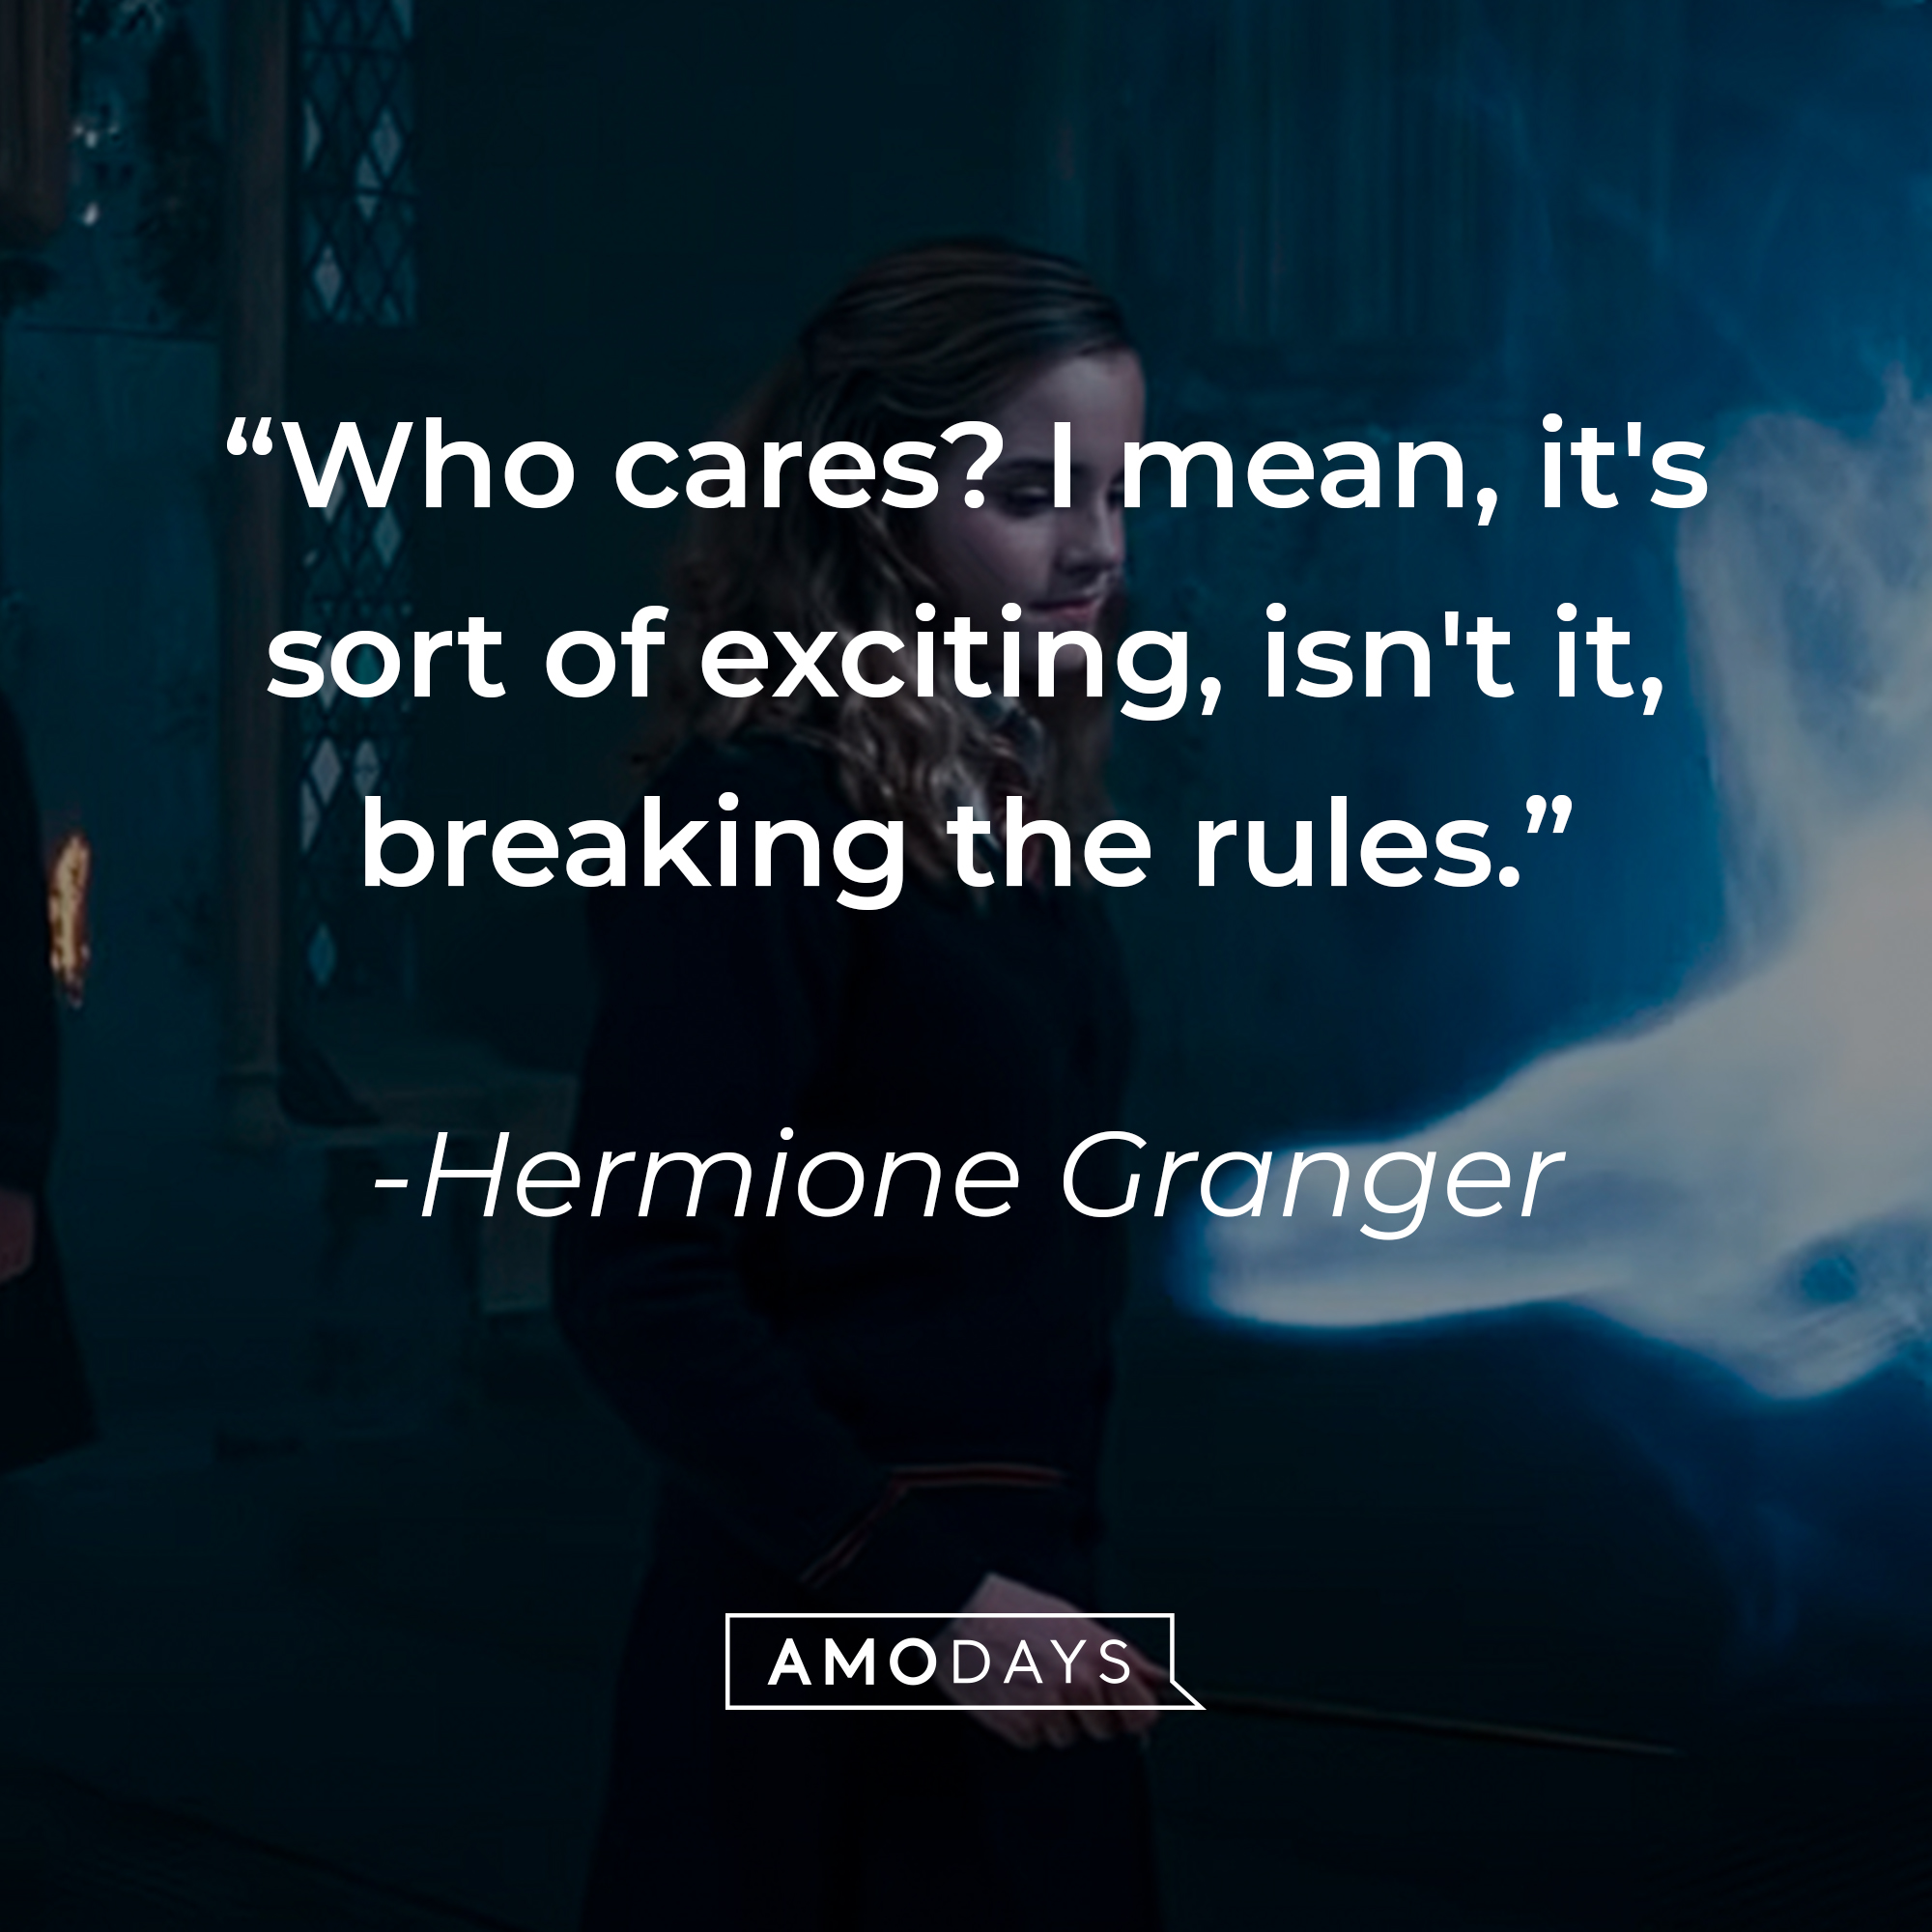 Hermione Granger's quote: “Who cares? I mean, it's sort of exciting, isn't it, breaking the rules.” | Source: youtube.com/harrypotter